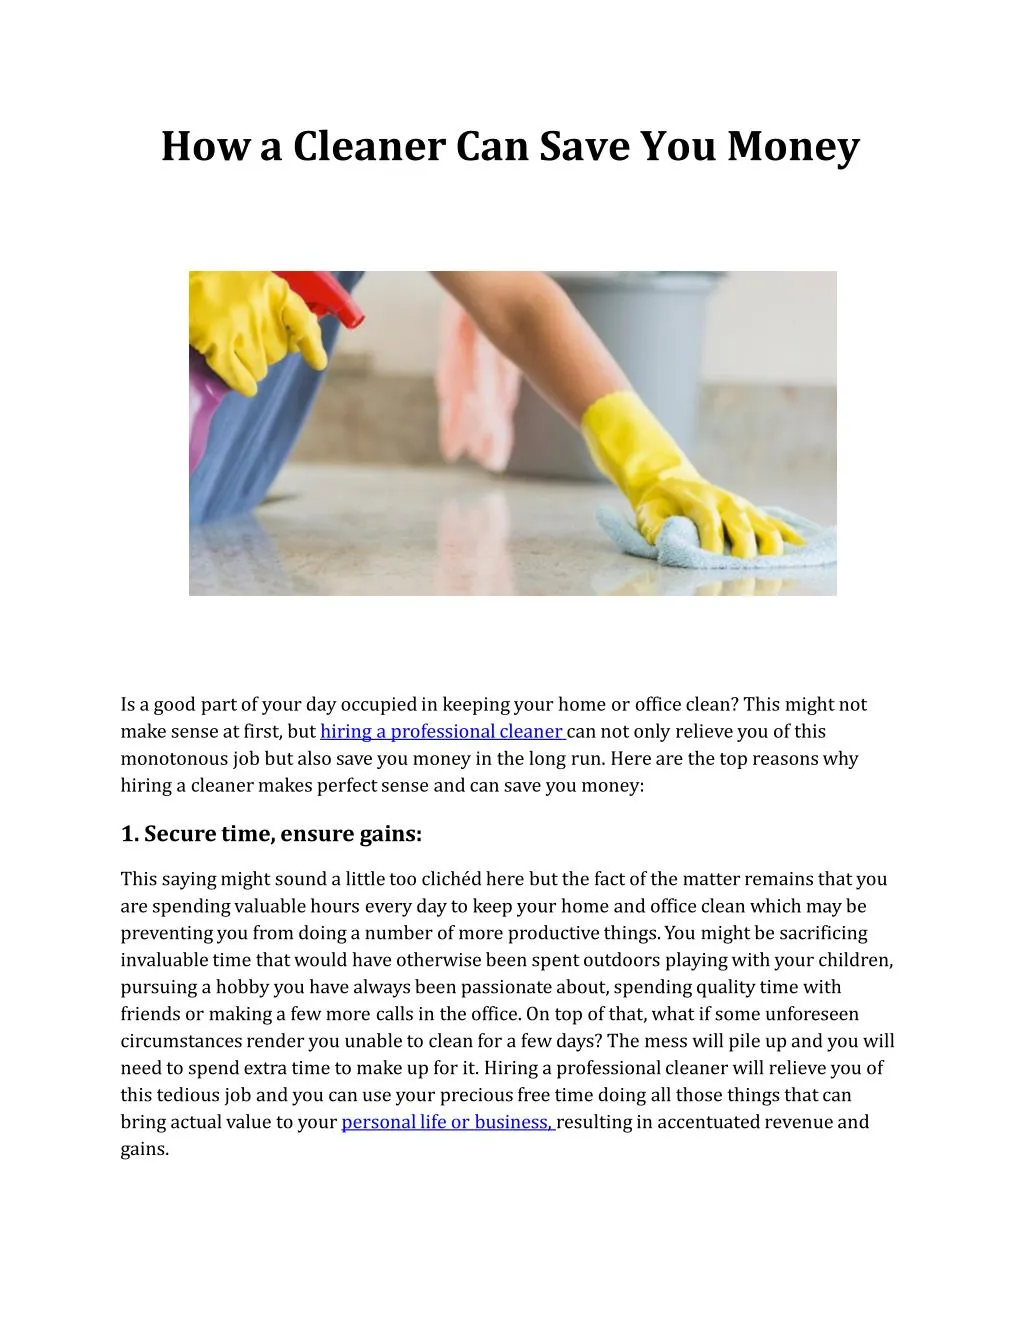 how a cleaner can save you money